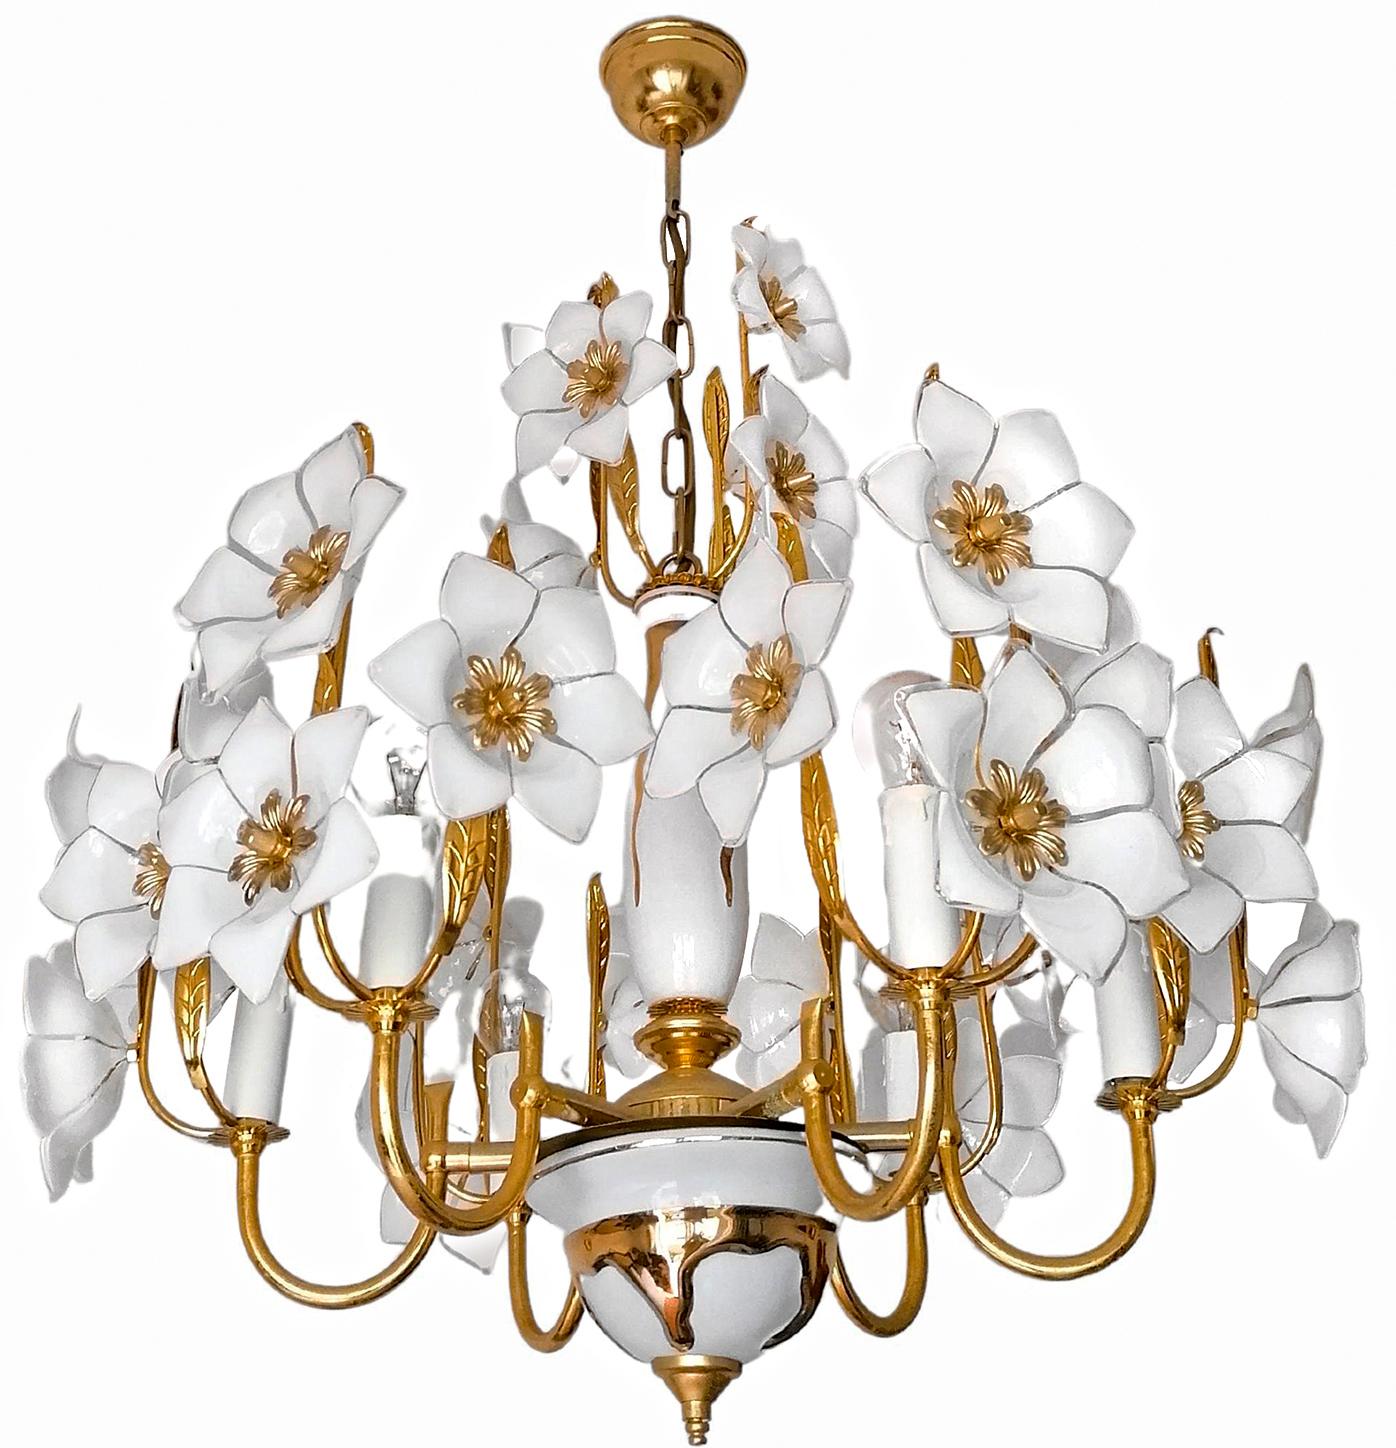 Gorgeous Pair of Italian Murano flower bouquet in the style of Venini art-glass with hand-blow white and clear glass flowers and gold-plated hand painted porcelain and brass. Price per item.

Dimensions:
Height: 30.32 in. (77 cm)
Diameter: 23.63 in.